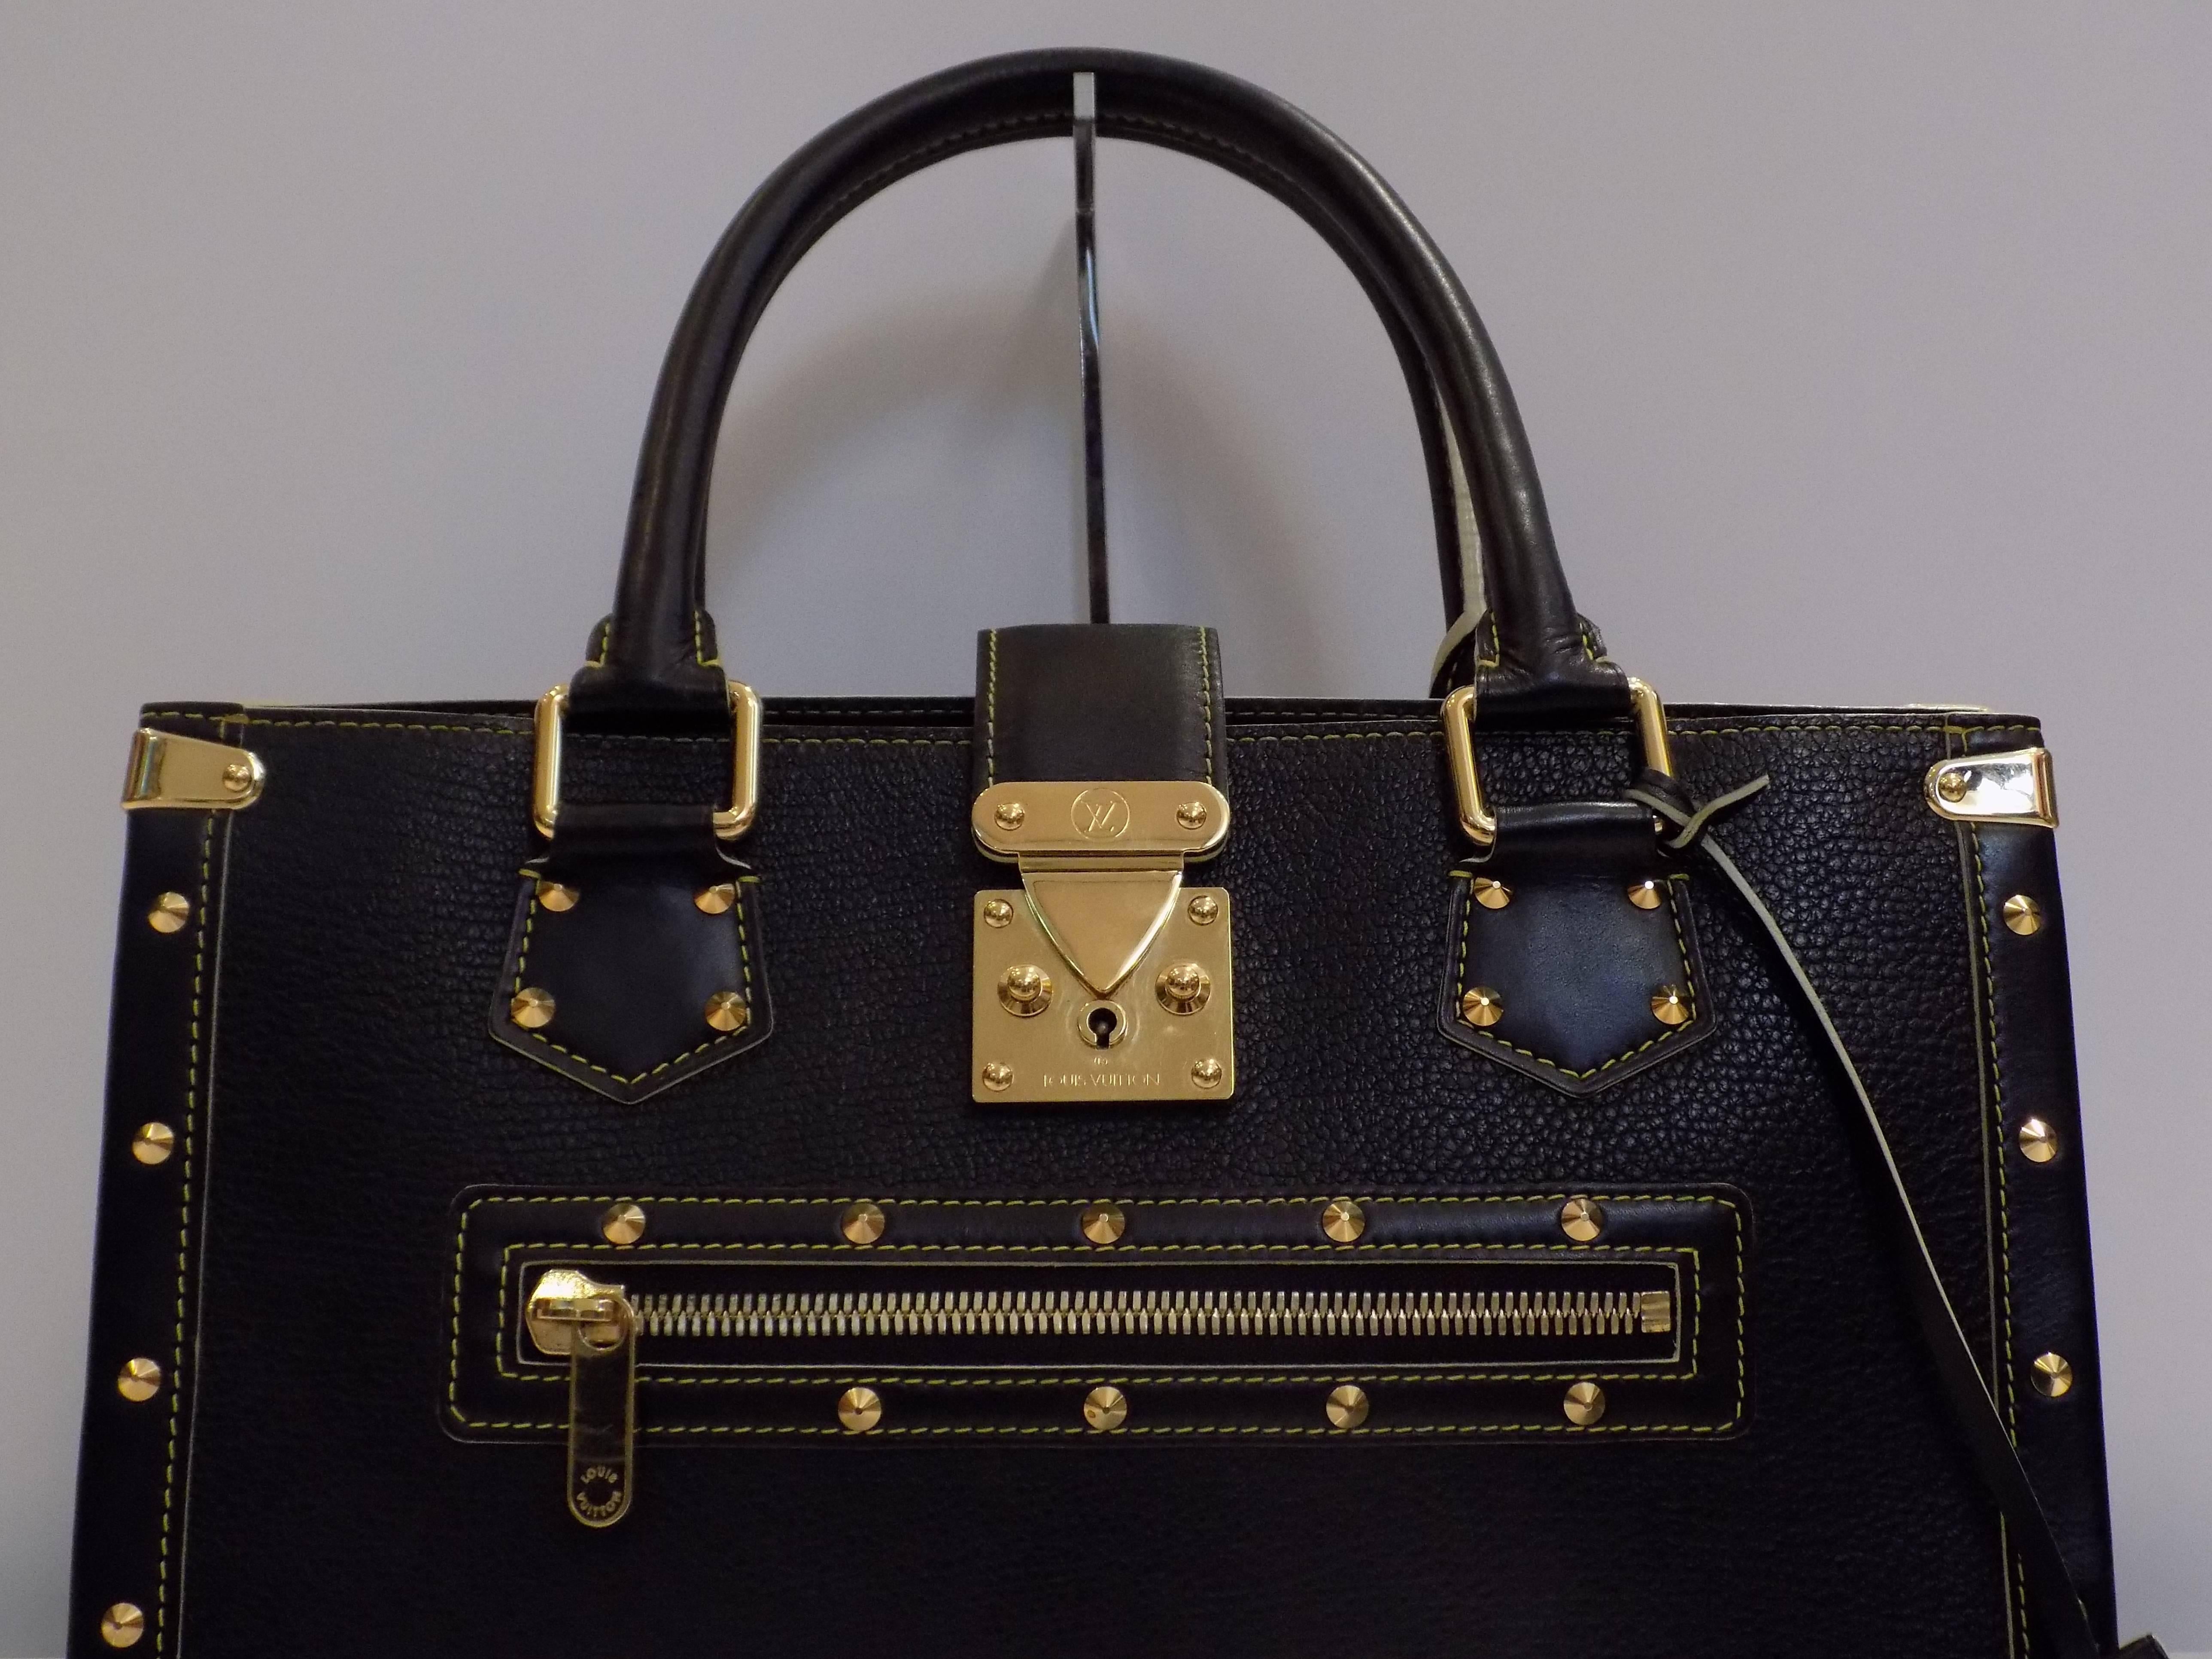 2003s Louis Vuitton Suhali Black Leather Le fabeleux bag
This is a stunning Louis Vuitton Black Suhali Le Fabuleux Bag that features a structured yet elegant shape. It is made of the finest hand-selected goat leather and has been impeccably